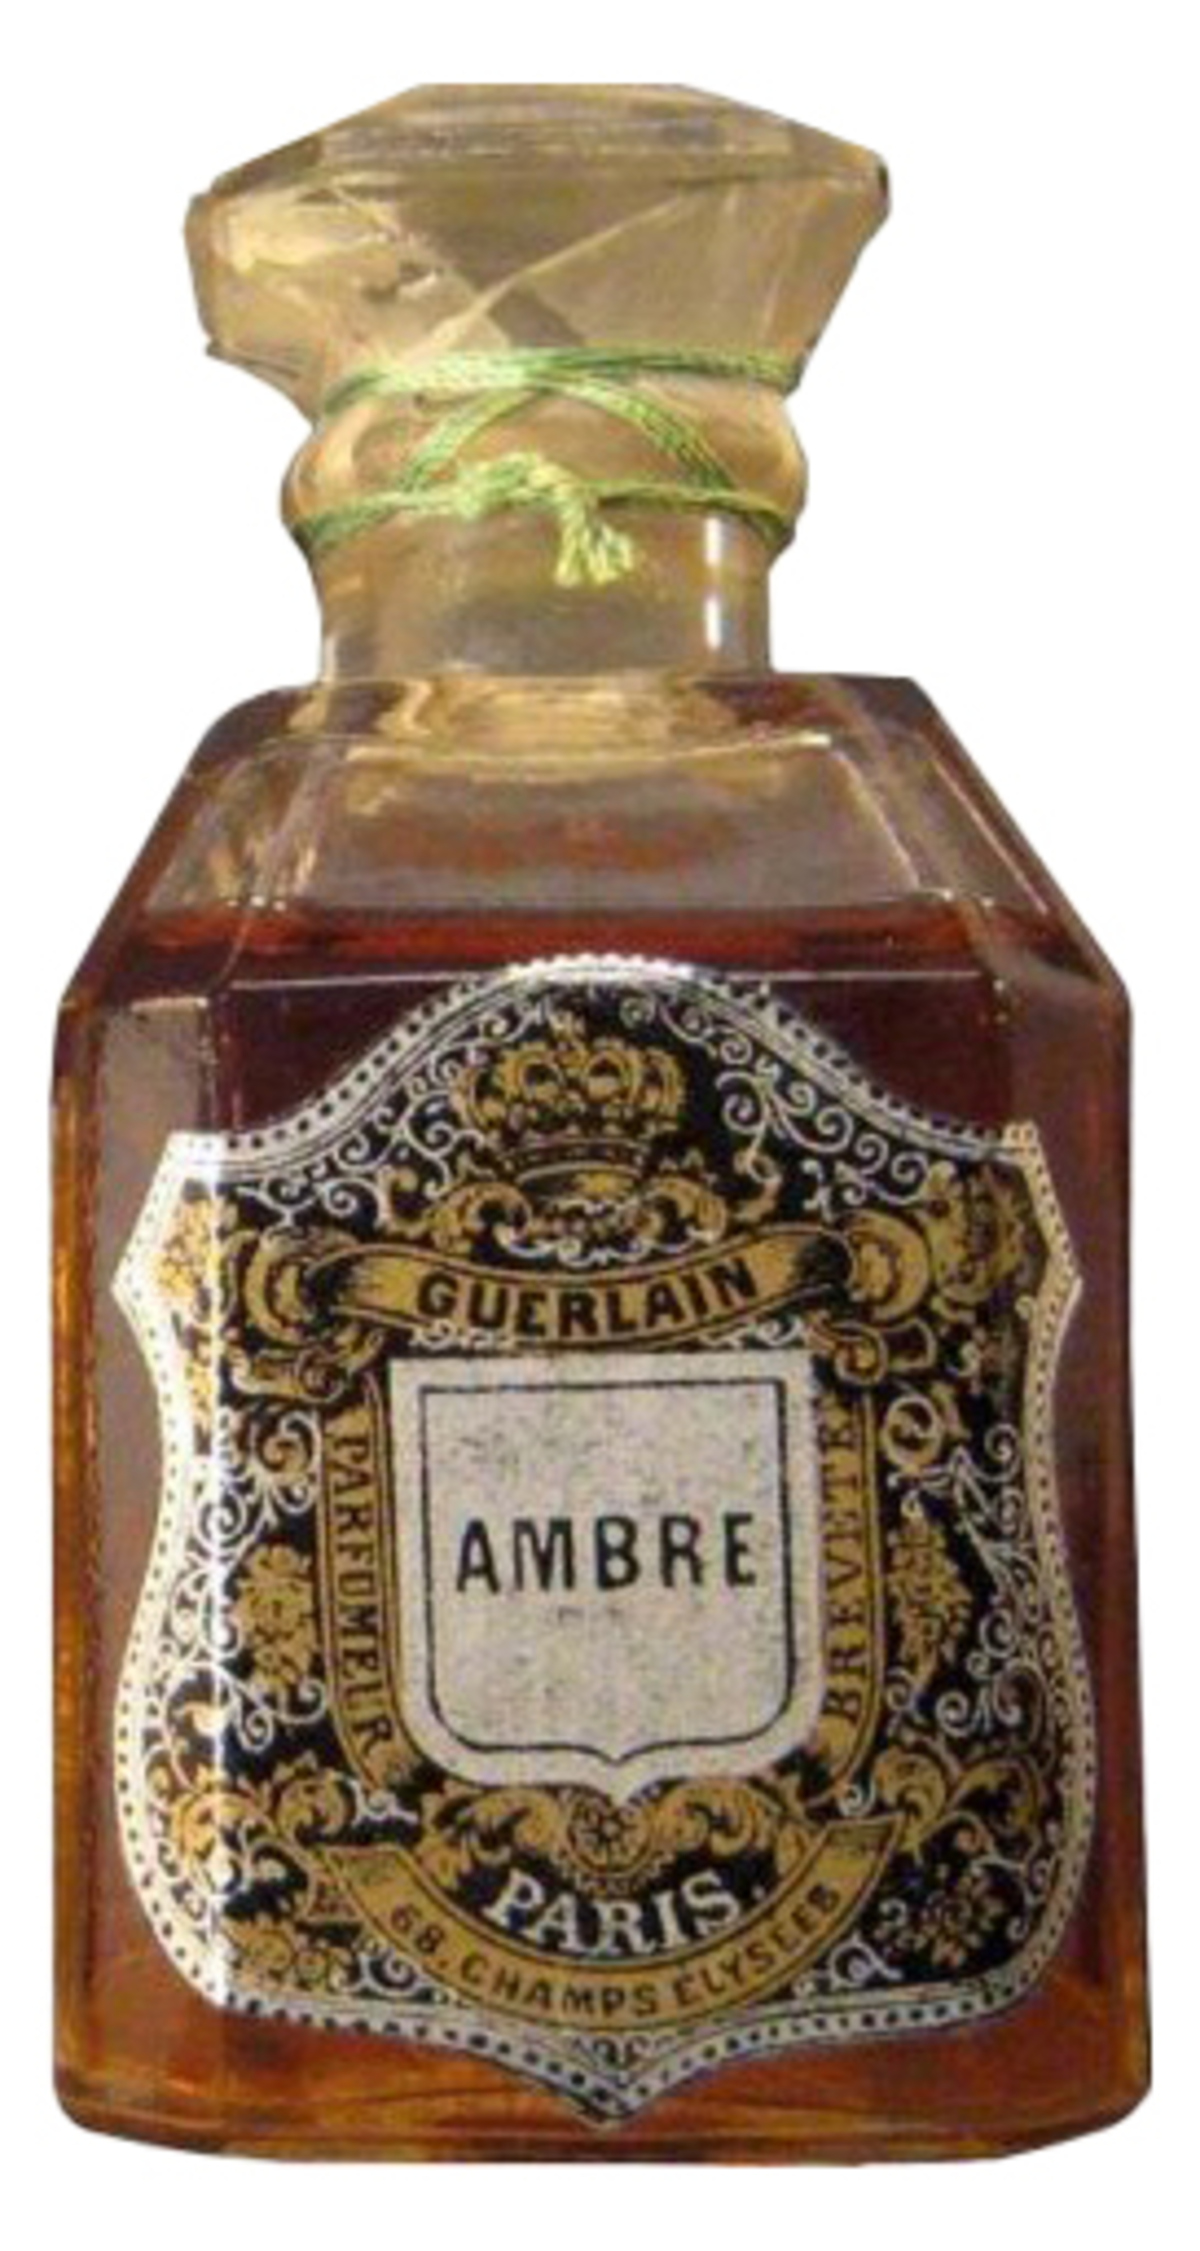 Jacques' first work 'Ambre'